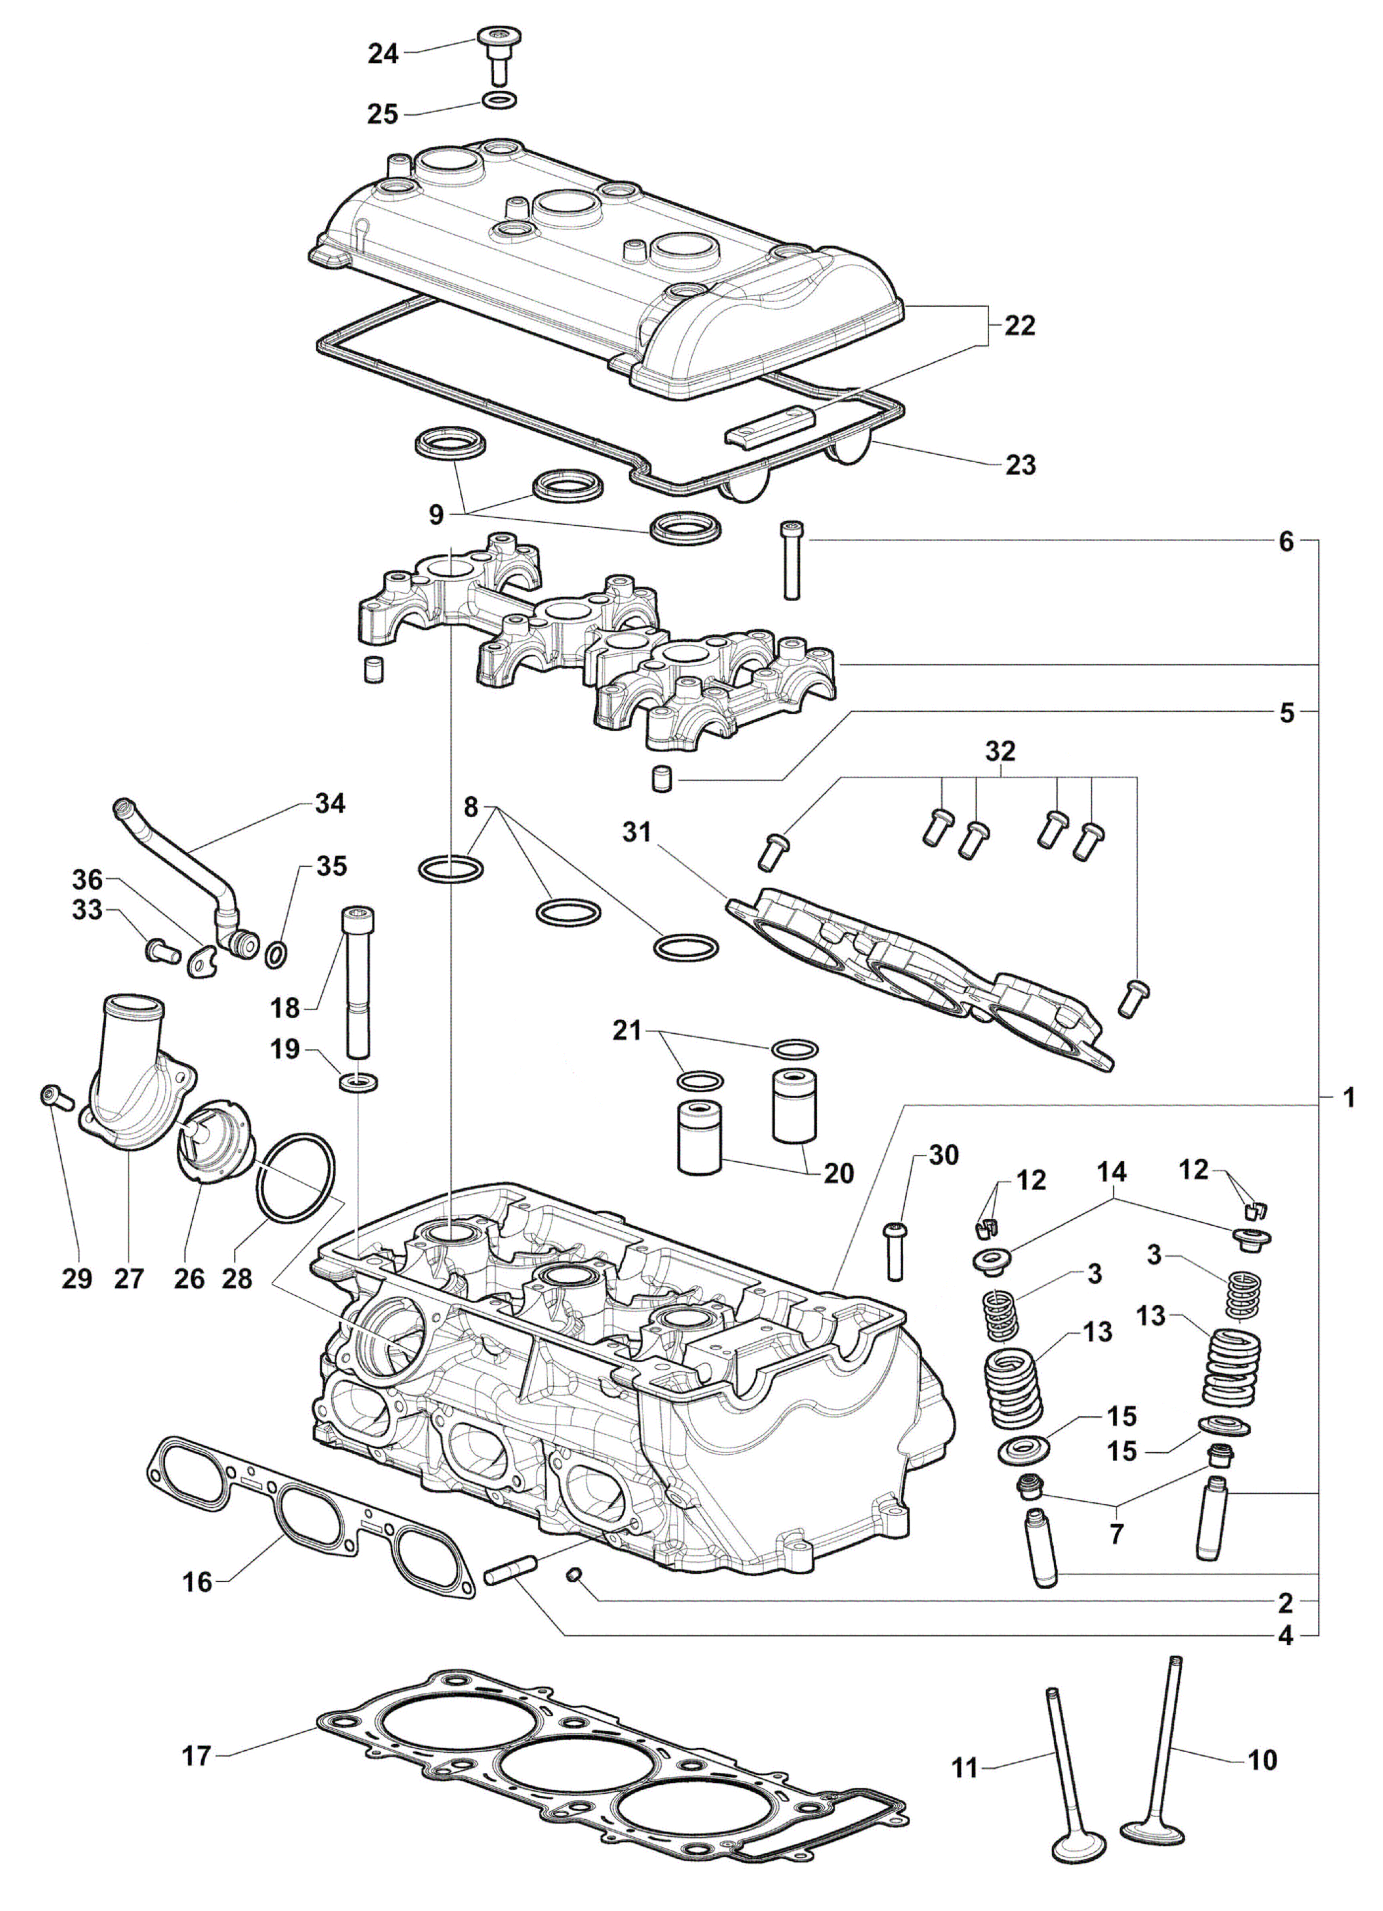 Cylinder Head Assembly


